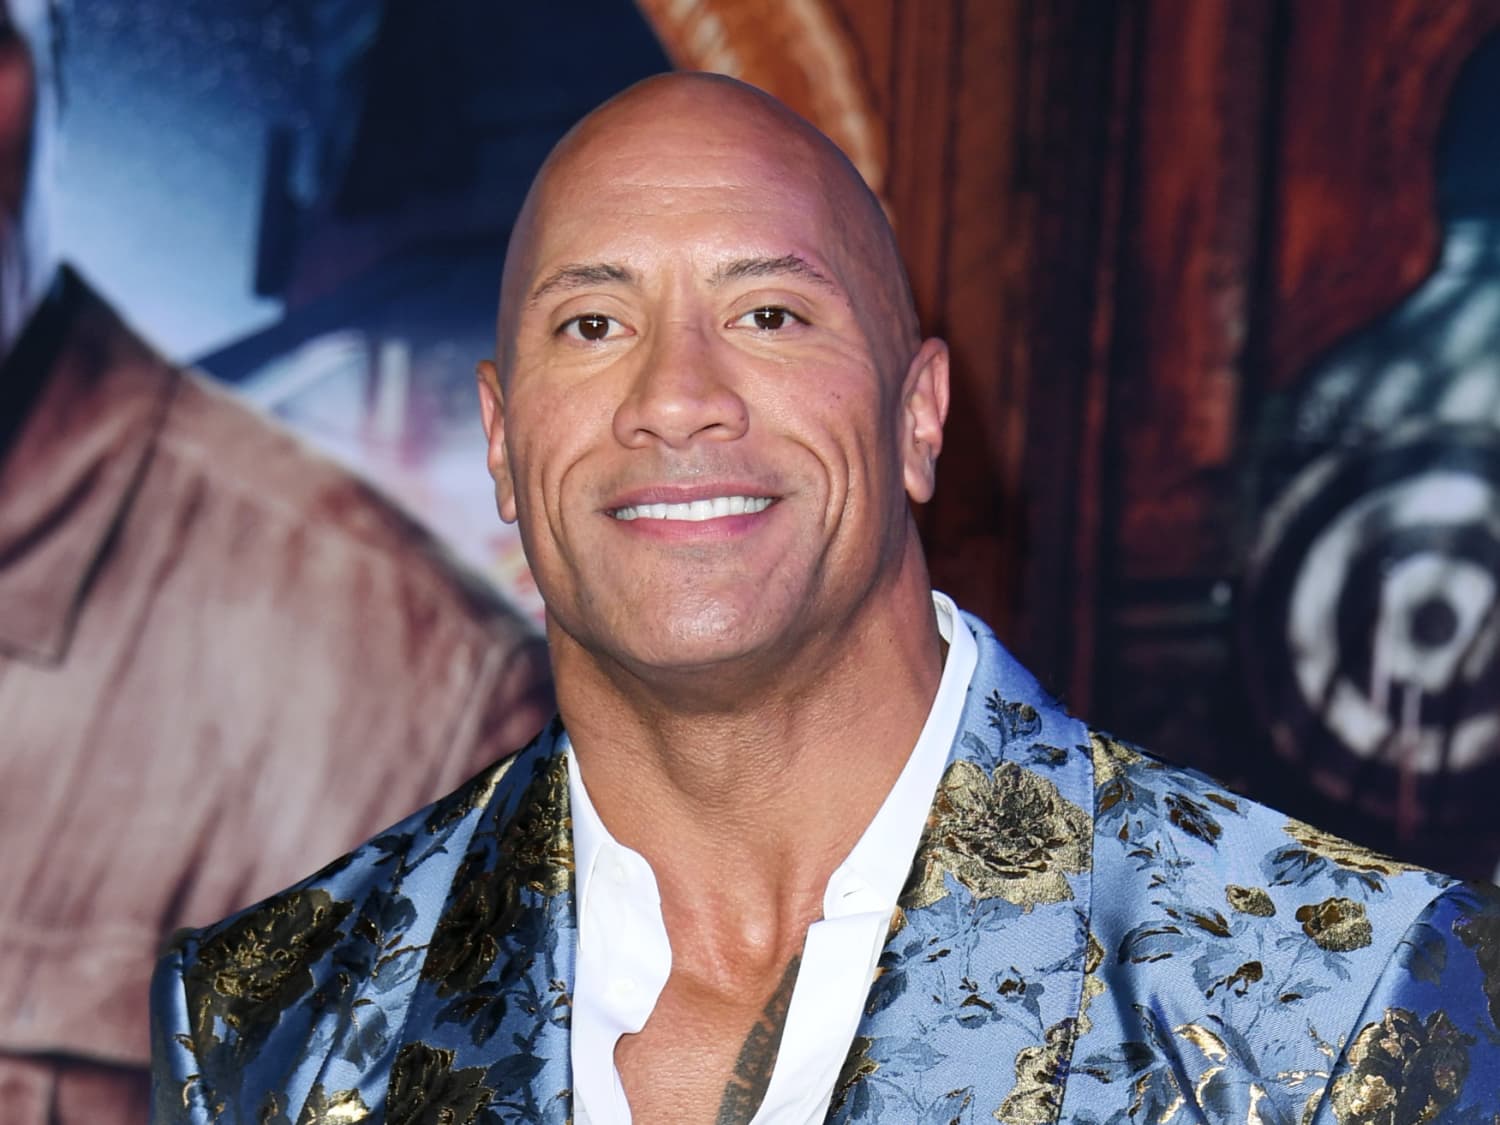 Dwayne "The Rock" Johnson's Massive Post-Workout Meal Features So Much Food  | Kitchn